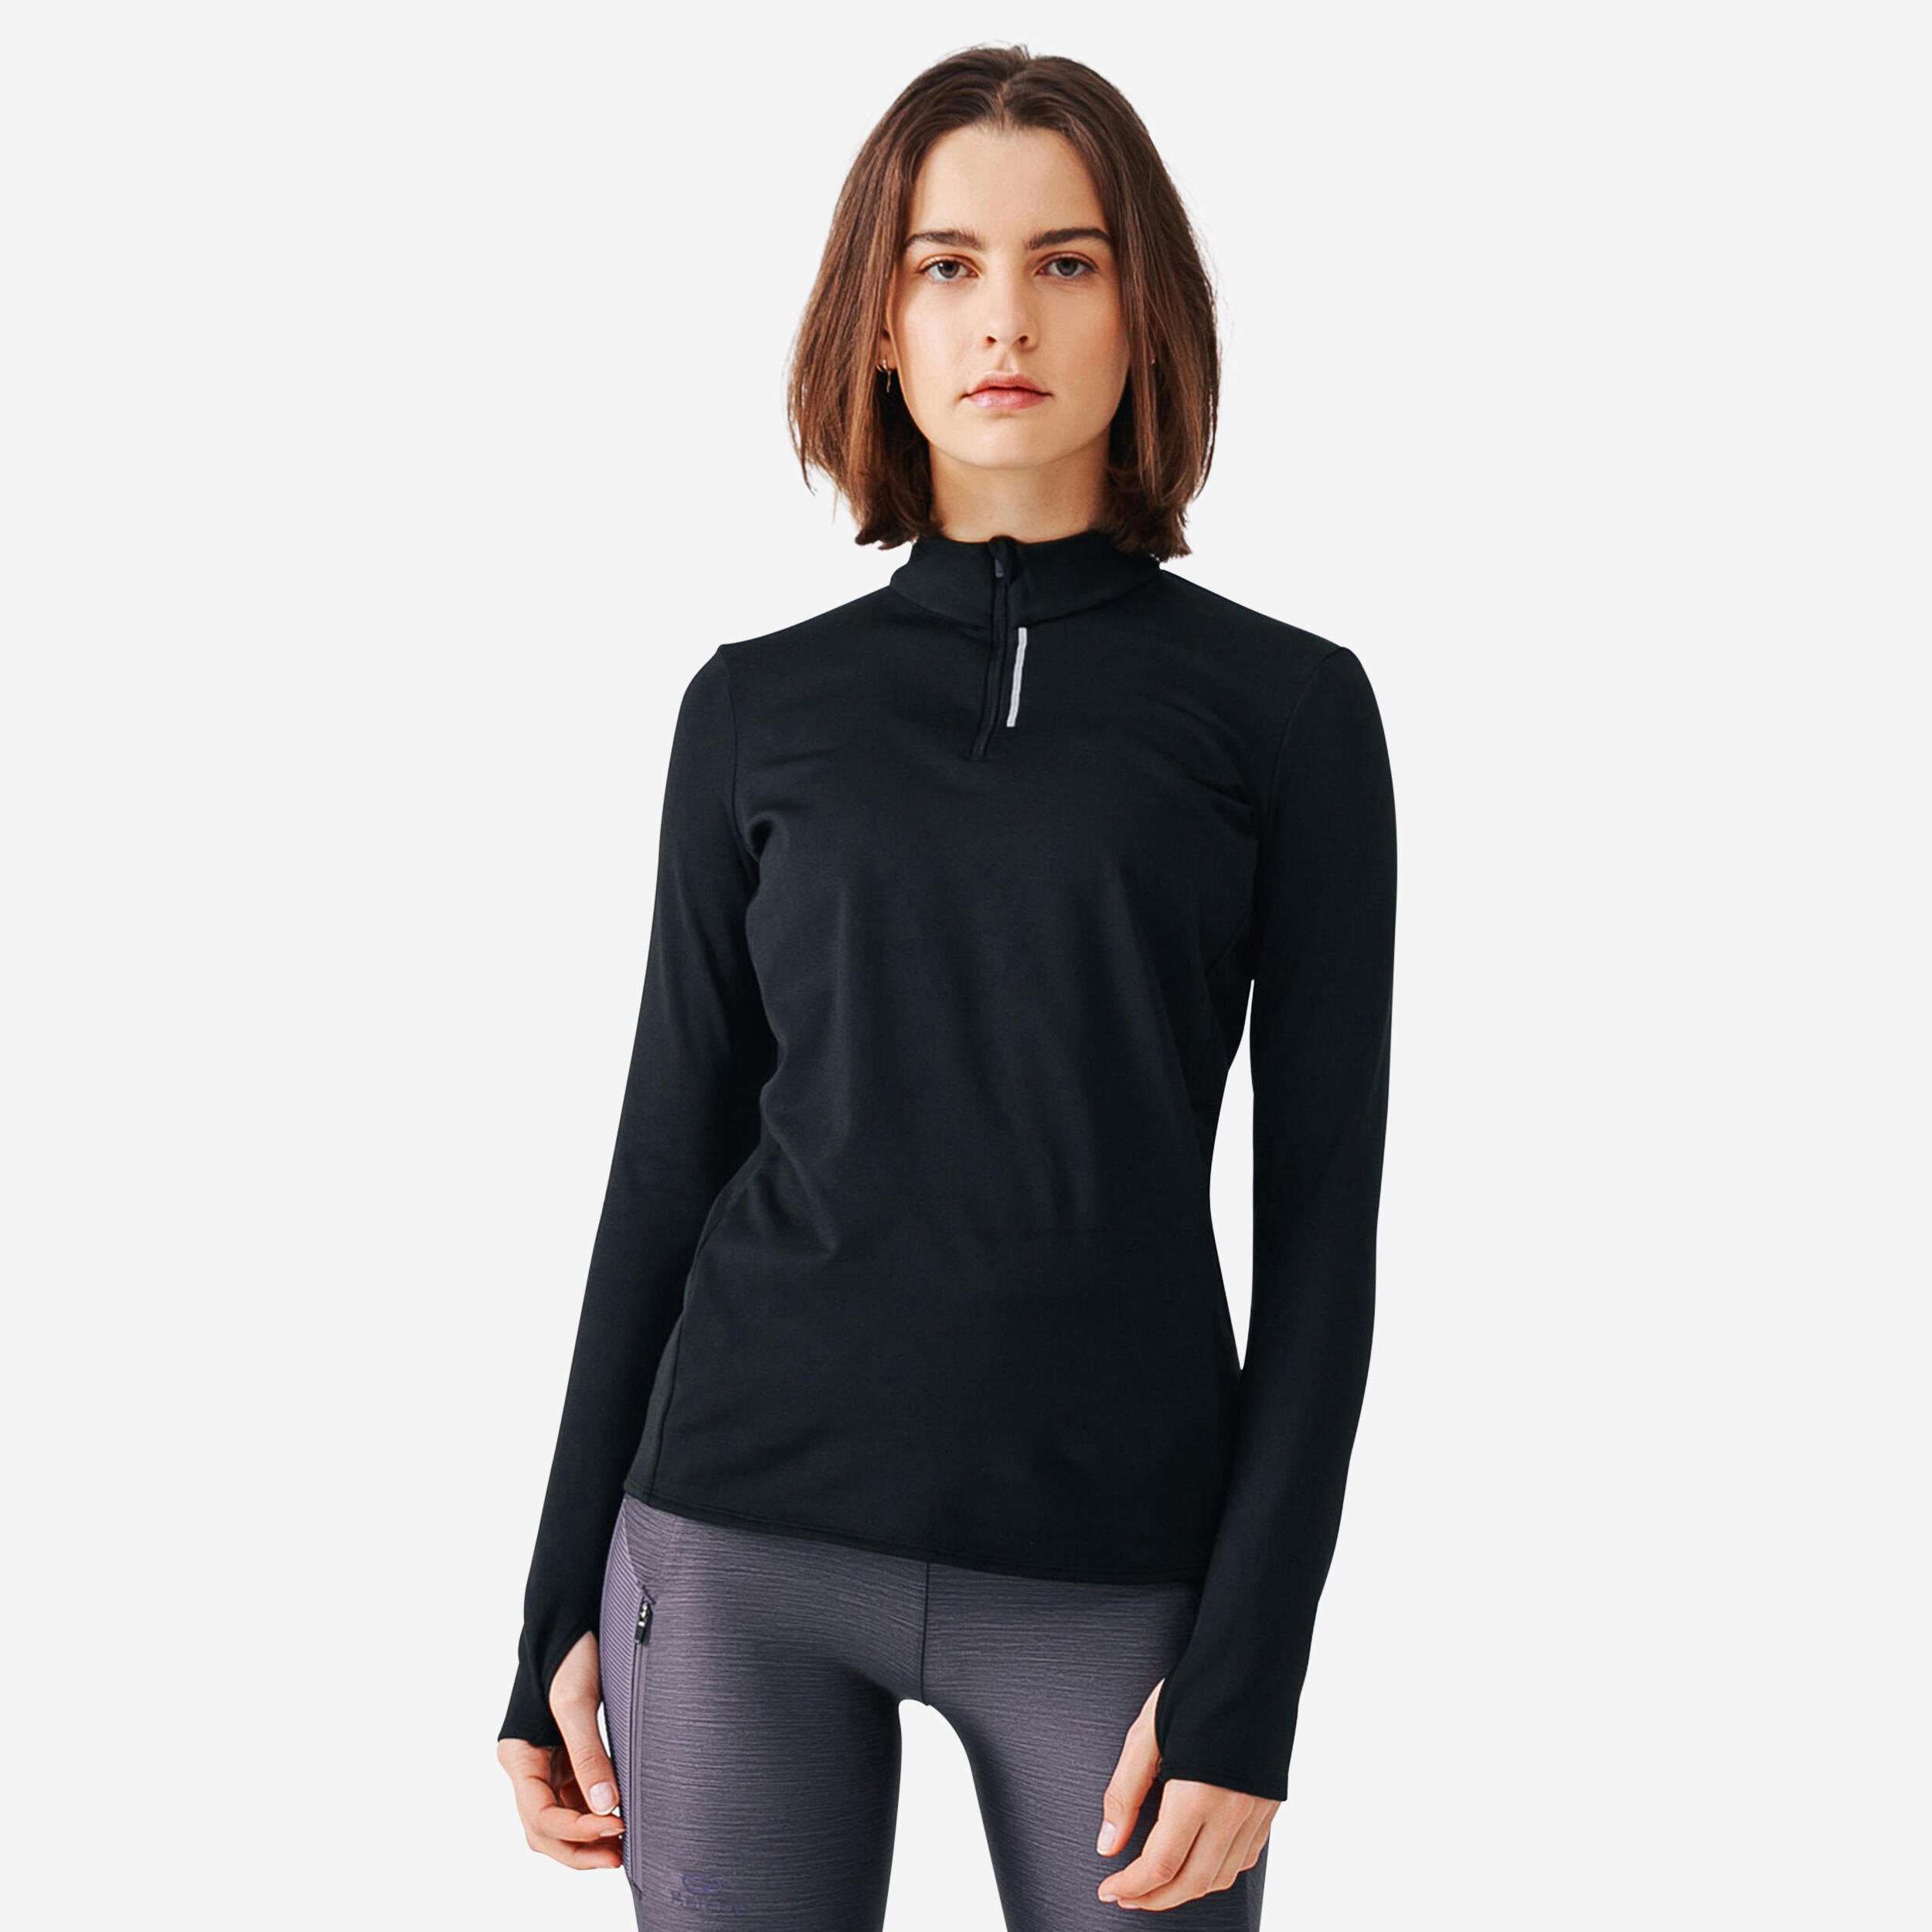  NOOZ Women's Dry Fit Athletic Fleece Lined Thermal Compression Long  Sleeve T Shirt - Black, X-Small (Labeled S) : Clothing, Shoes & Jewelry